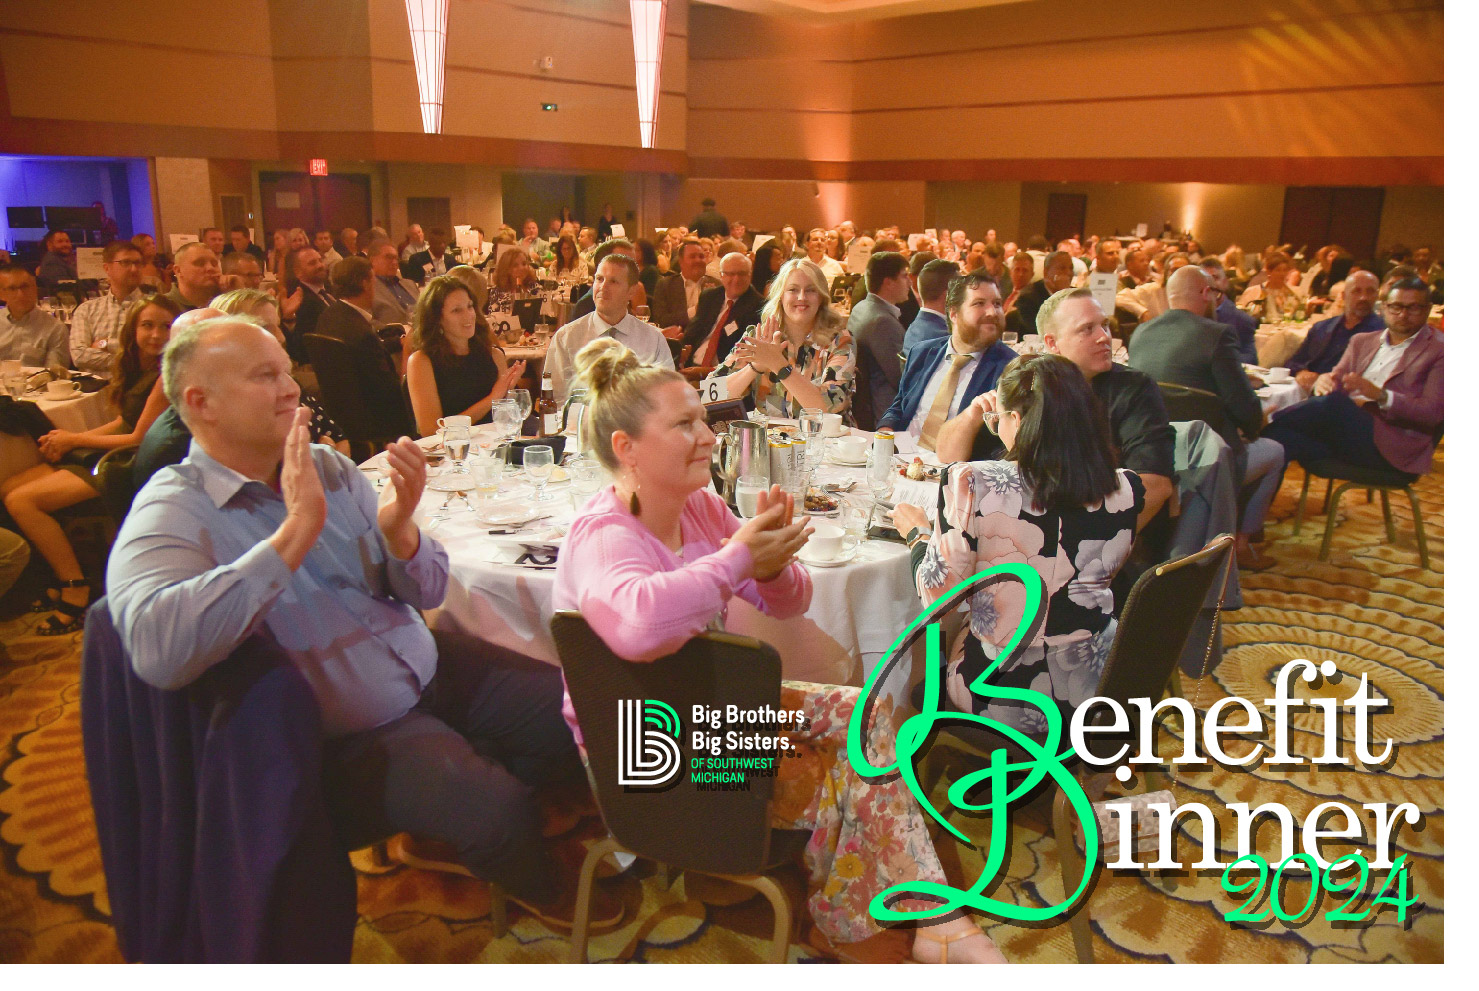 A crowd of people smiling and clapping inside of the Radisson's ballroom. In the lower right hand corner is the 2024 Benefit Dinner logo.